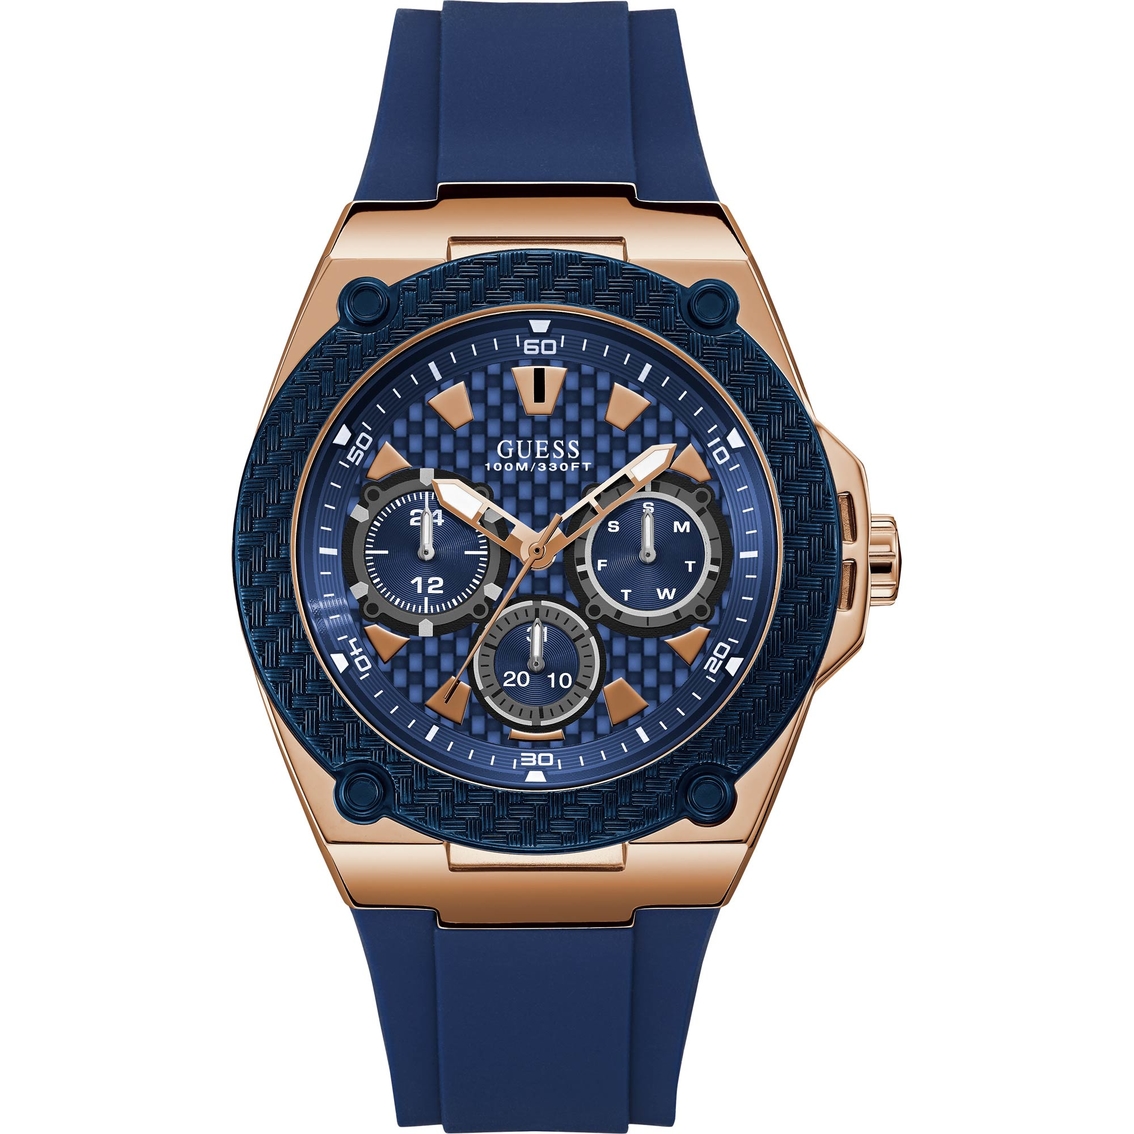 Guess Men's Blue And Goldtone Watch 45mm U1049g2 | Non-metal Band ...